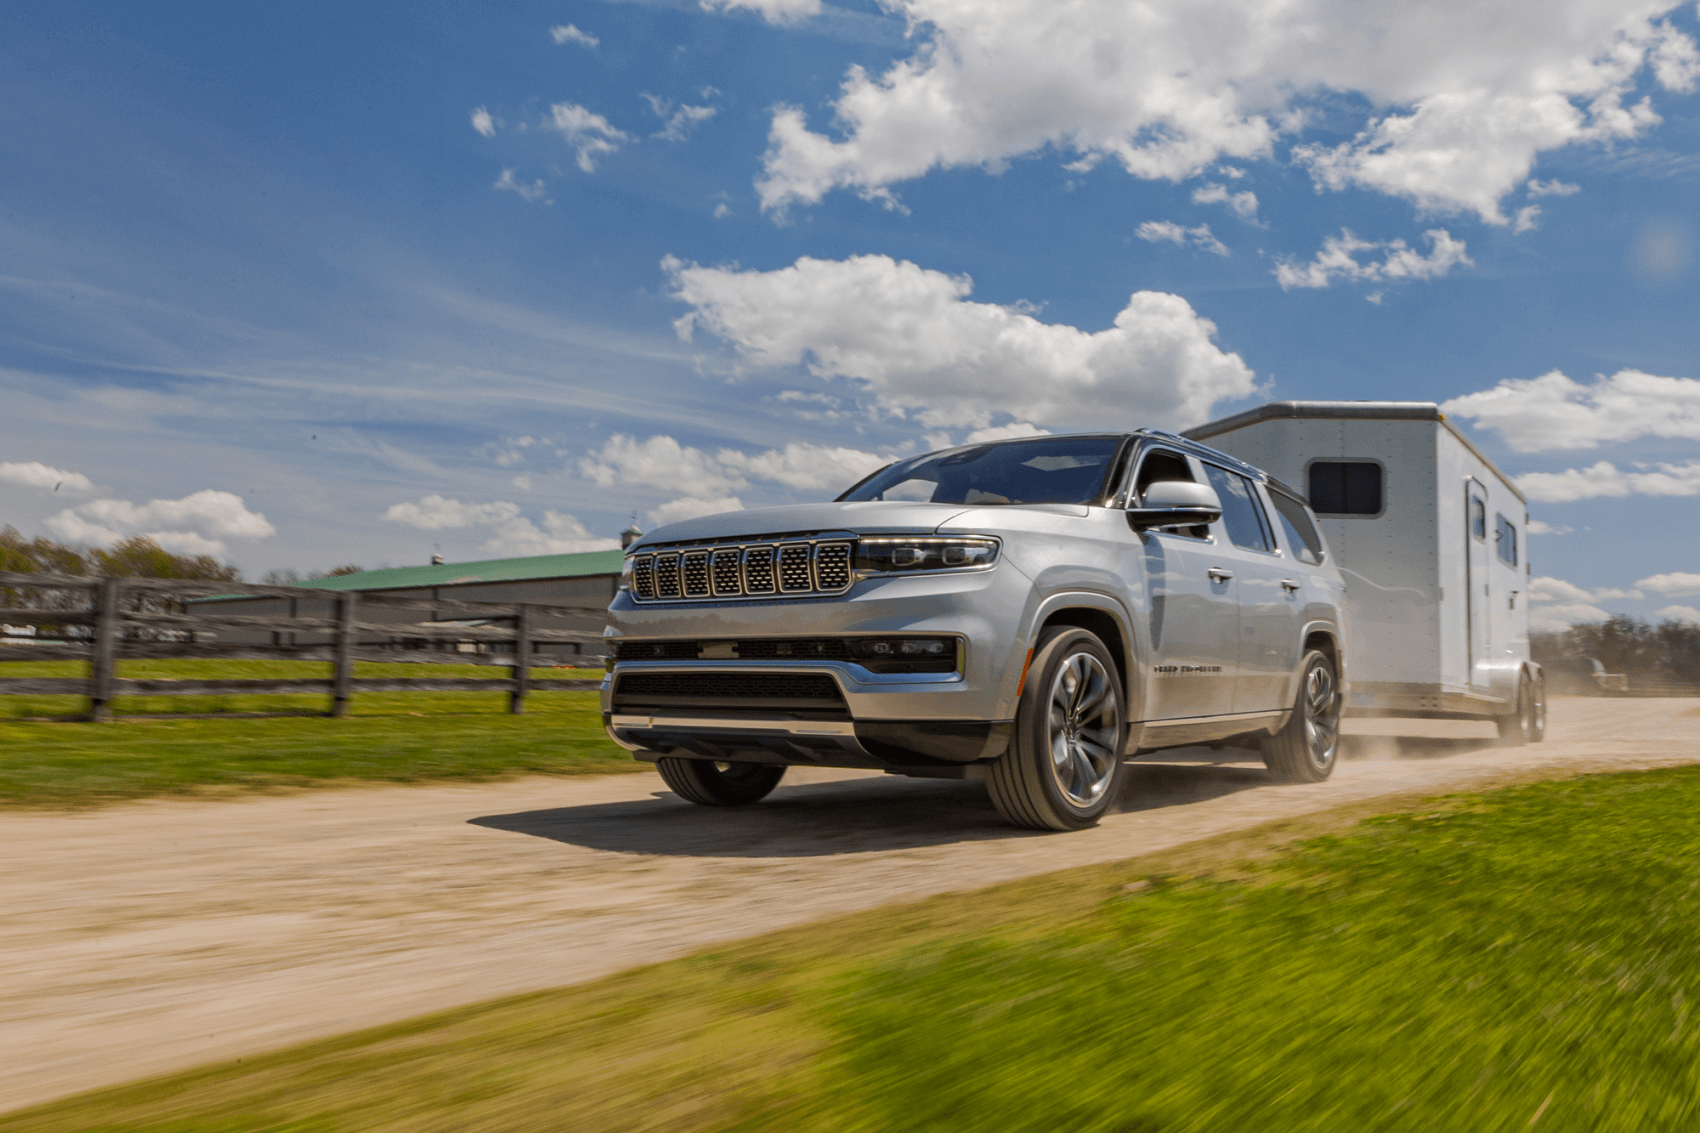 2022 Jeep Grand Wagoneer Silver Towing Trailer